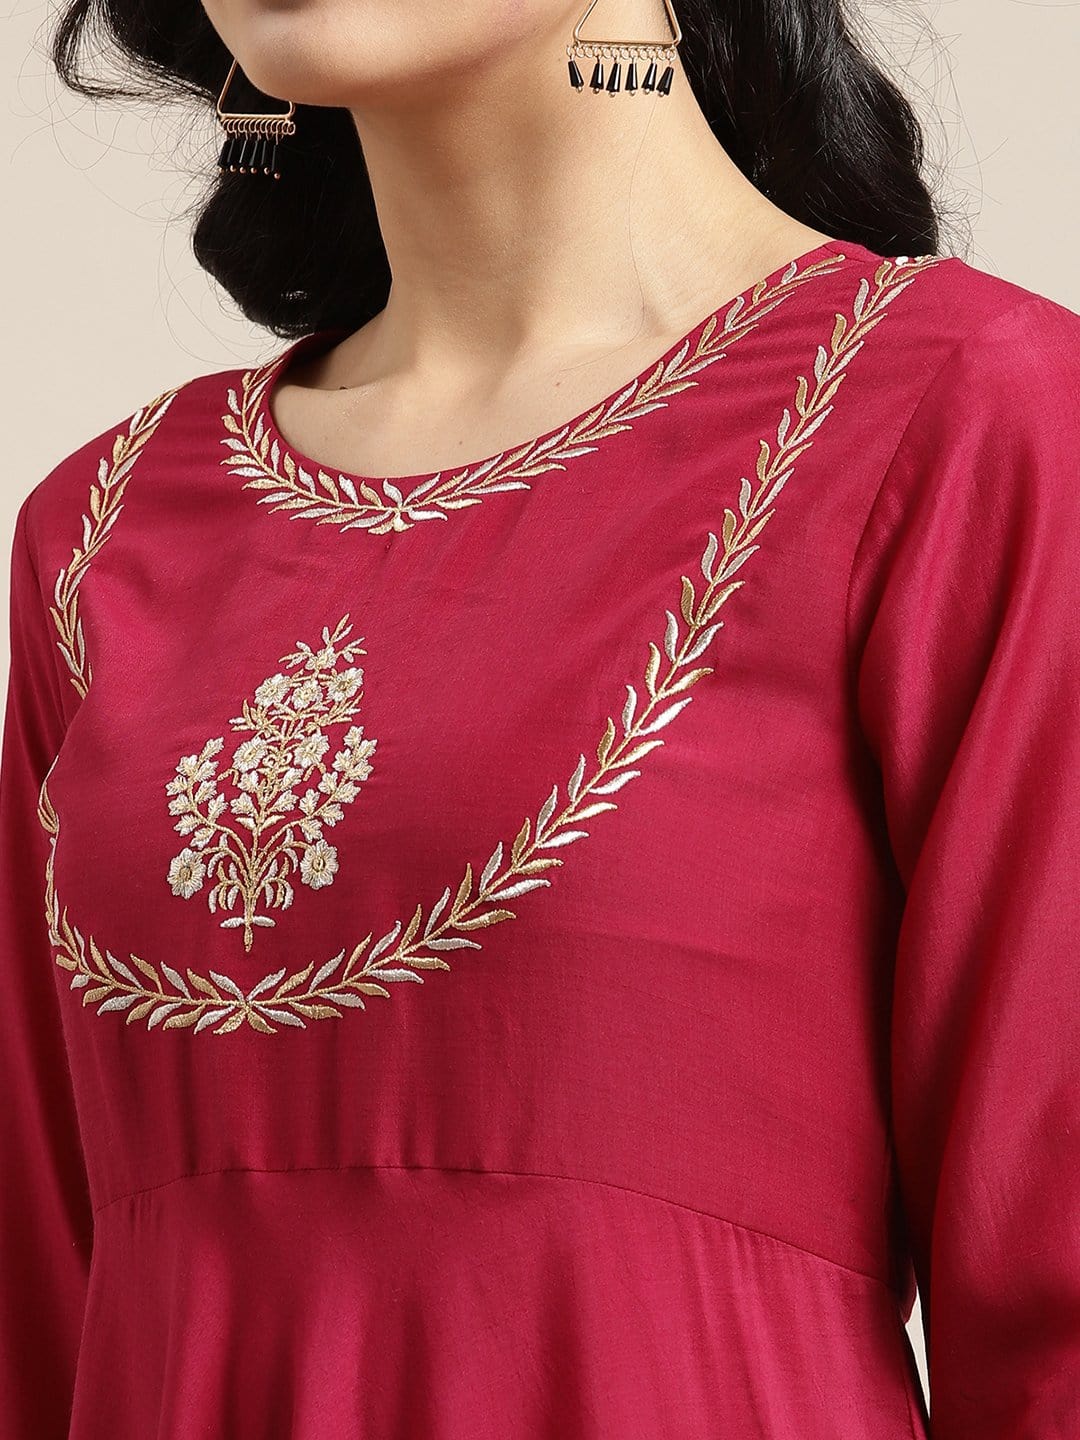 Women's Magenta And Gold Anarkali, Solid Kurta With Zari Work On Yoke And Paired With Gold Pant And Heavy Gota Embroidered Dupatta - Varanga